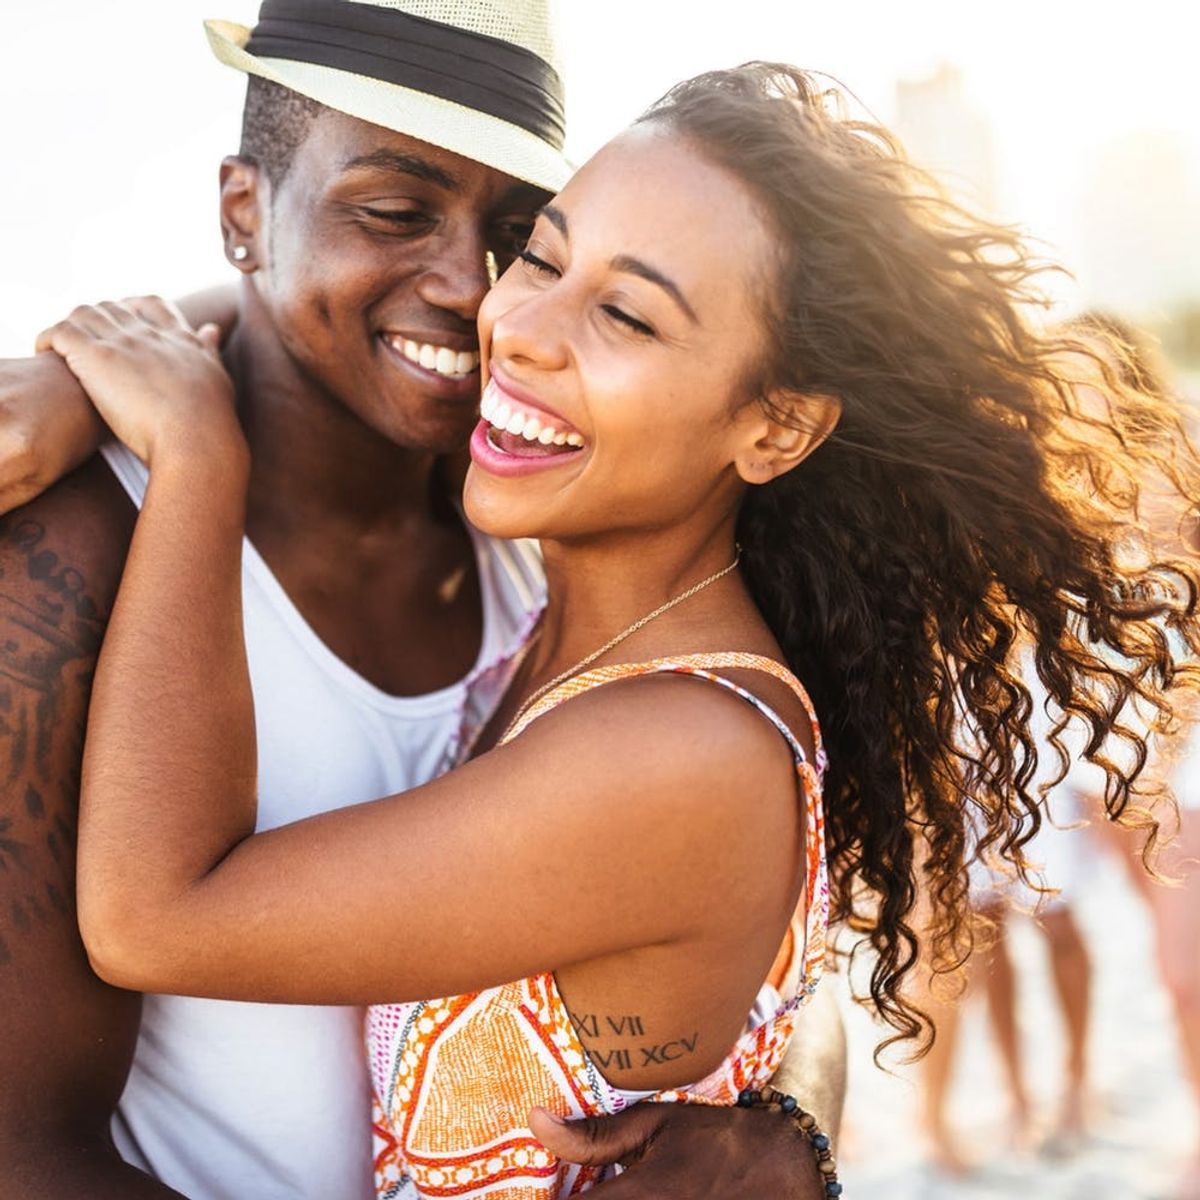 4 Relationship Attachment Styles + What They Mean for Your Love Life